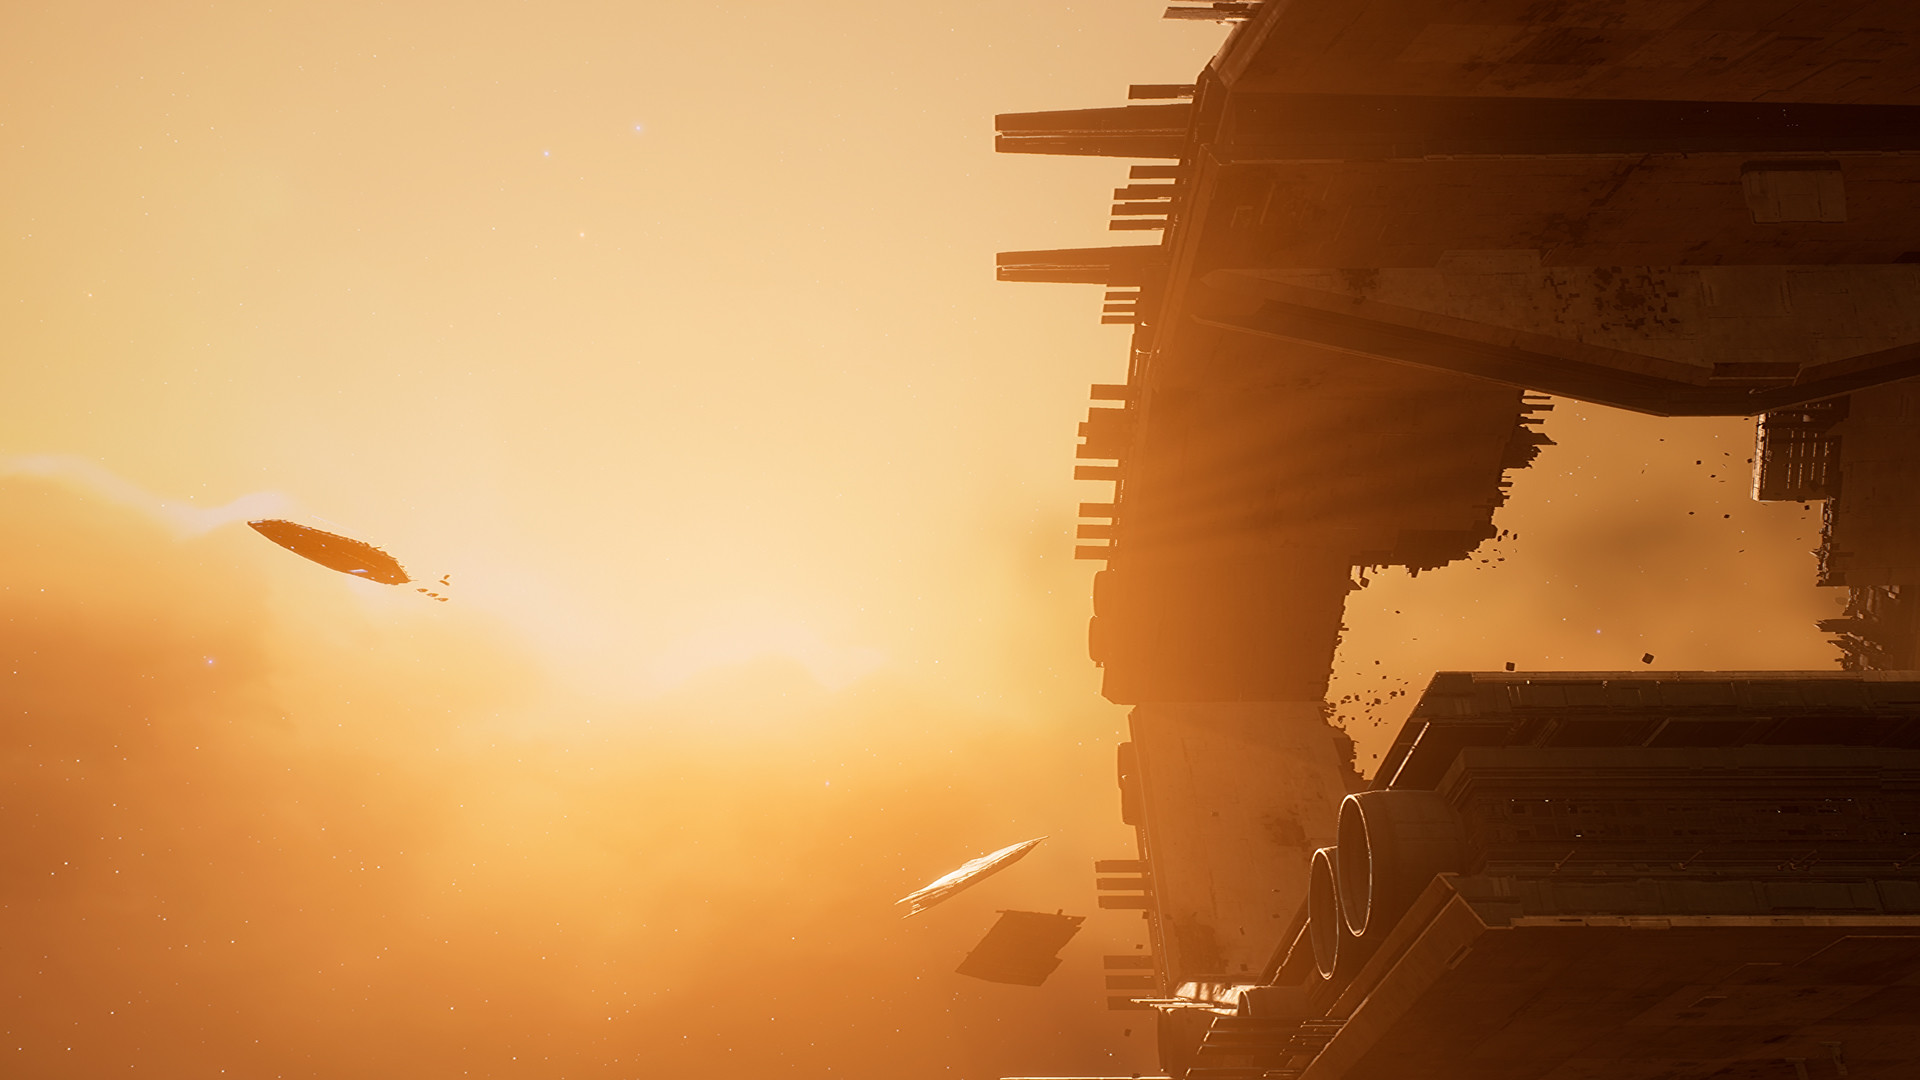 A wide shot of a relatively small spaceship approaching a massive docking bay, backlit by orange light